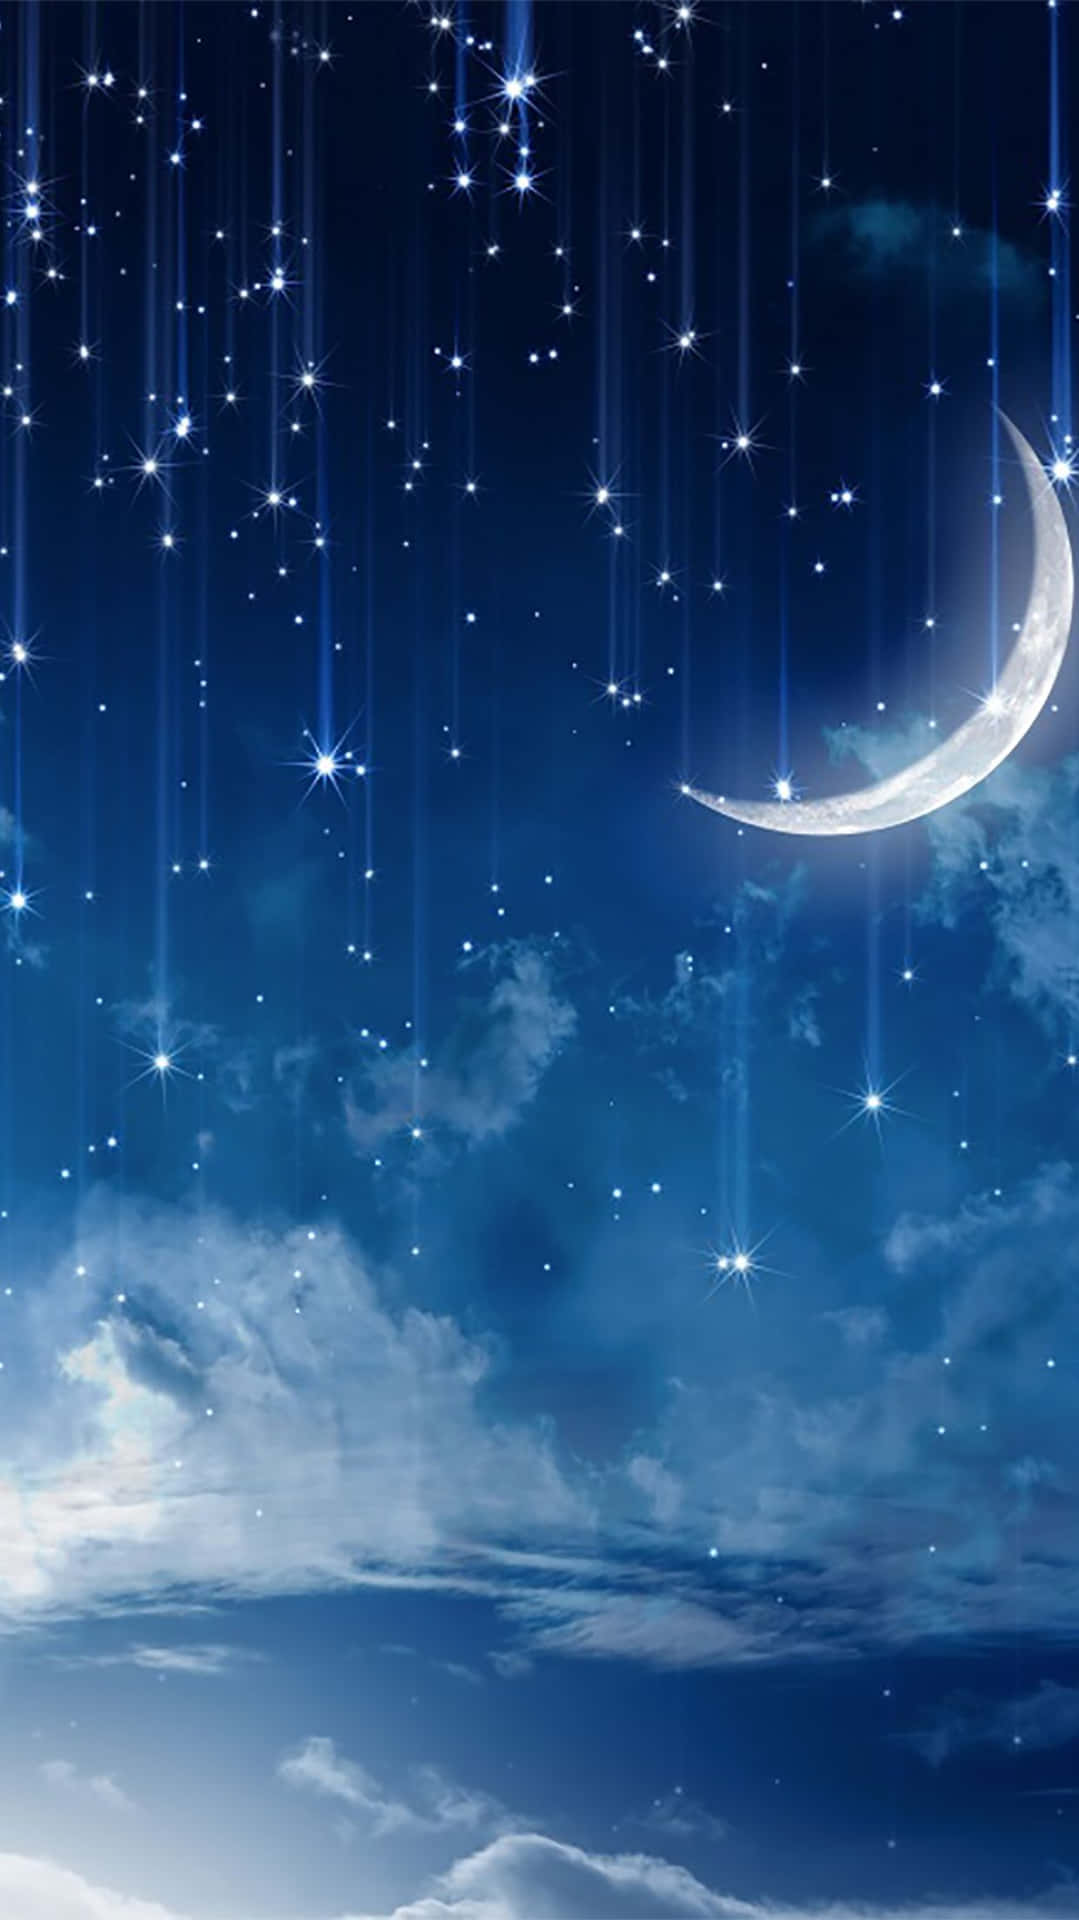 Night Sky Moon And Falling Stars Picture